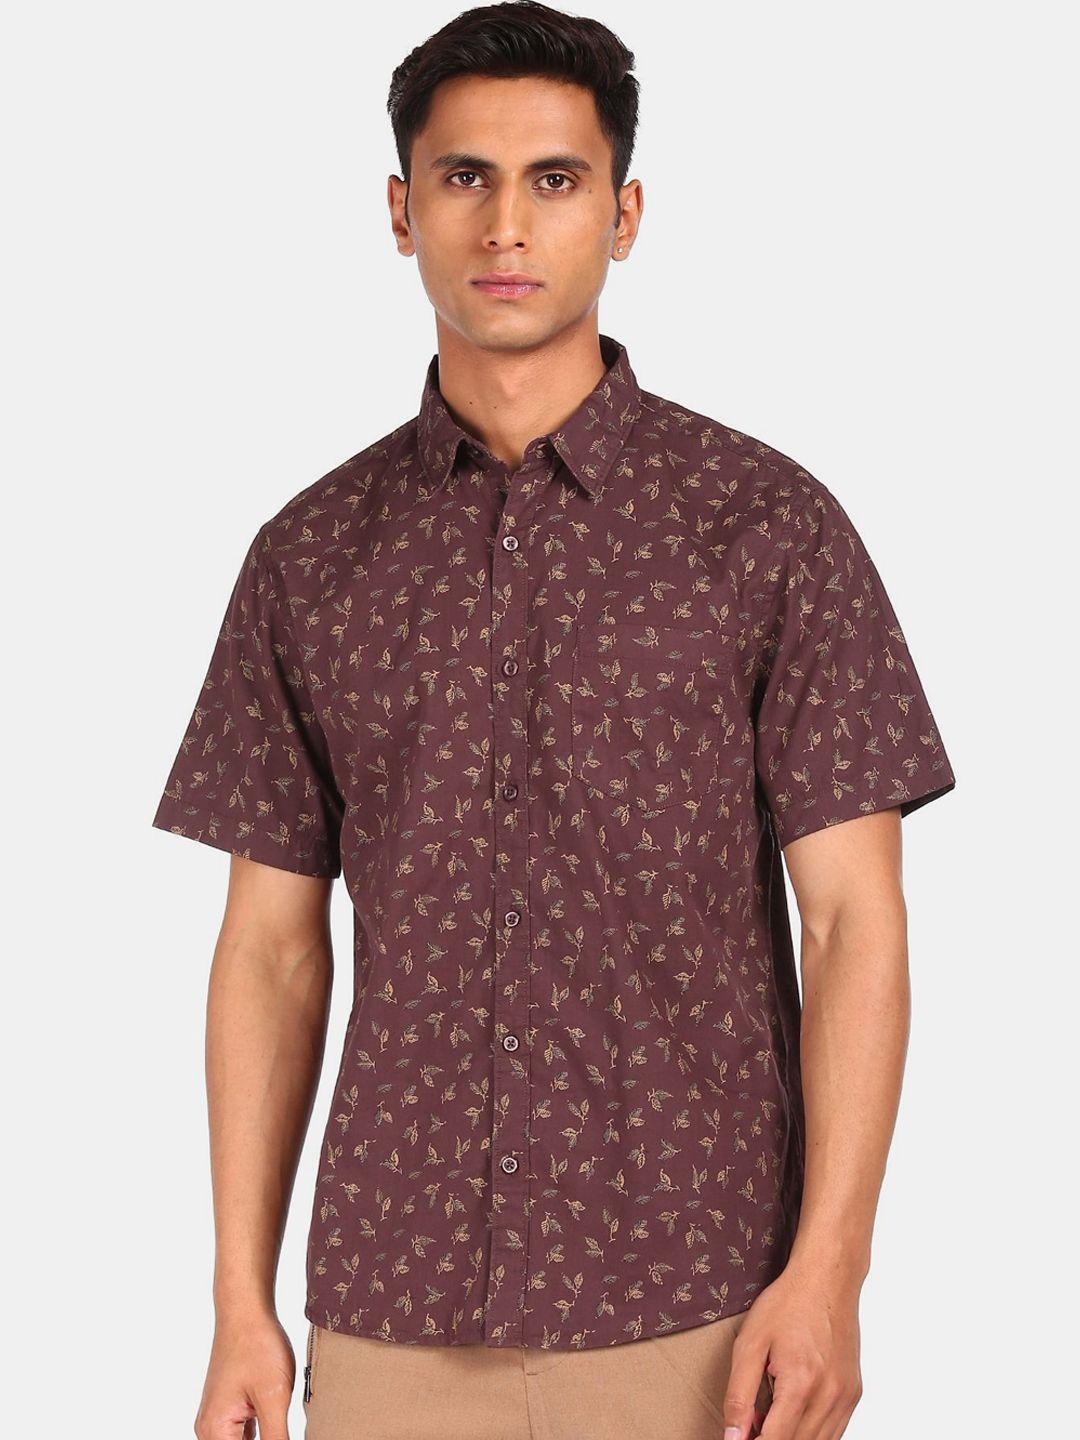 ruggers-men-maroon-floral-printed-cotton-casual-shirt